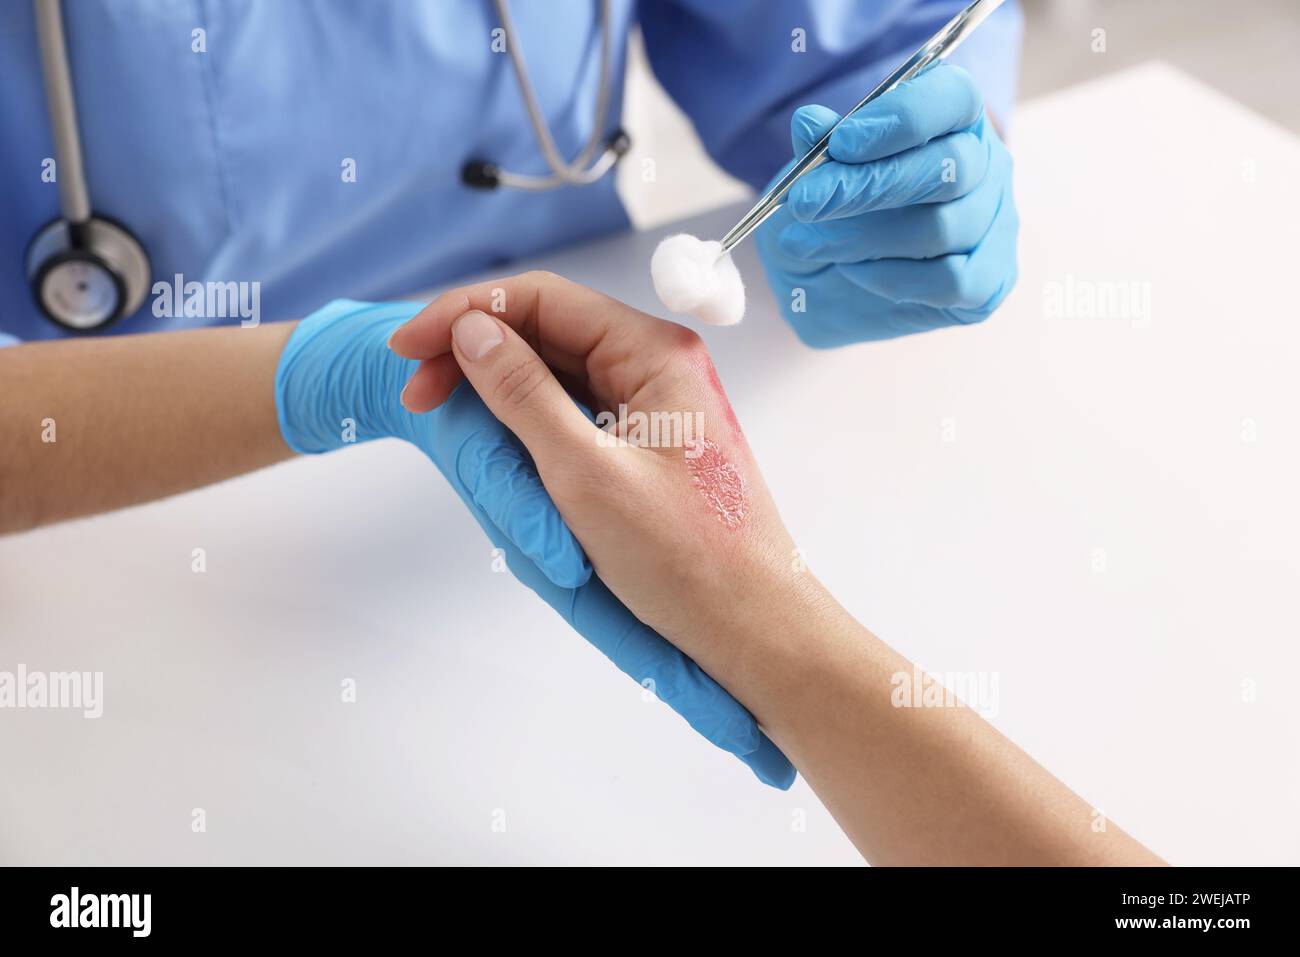 Doctor treating patient's burned hand at table, closeup Stock Photo